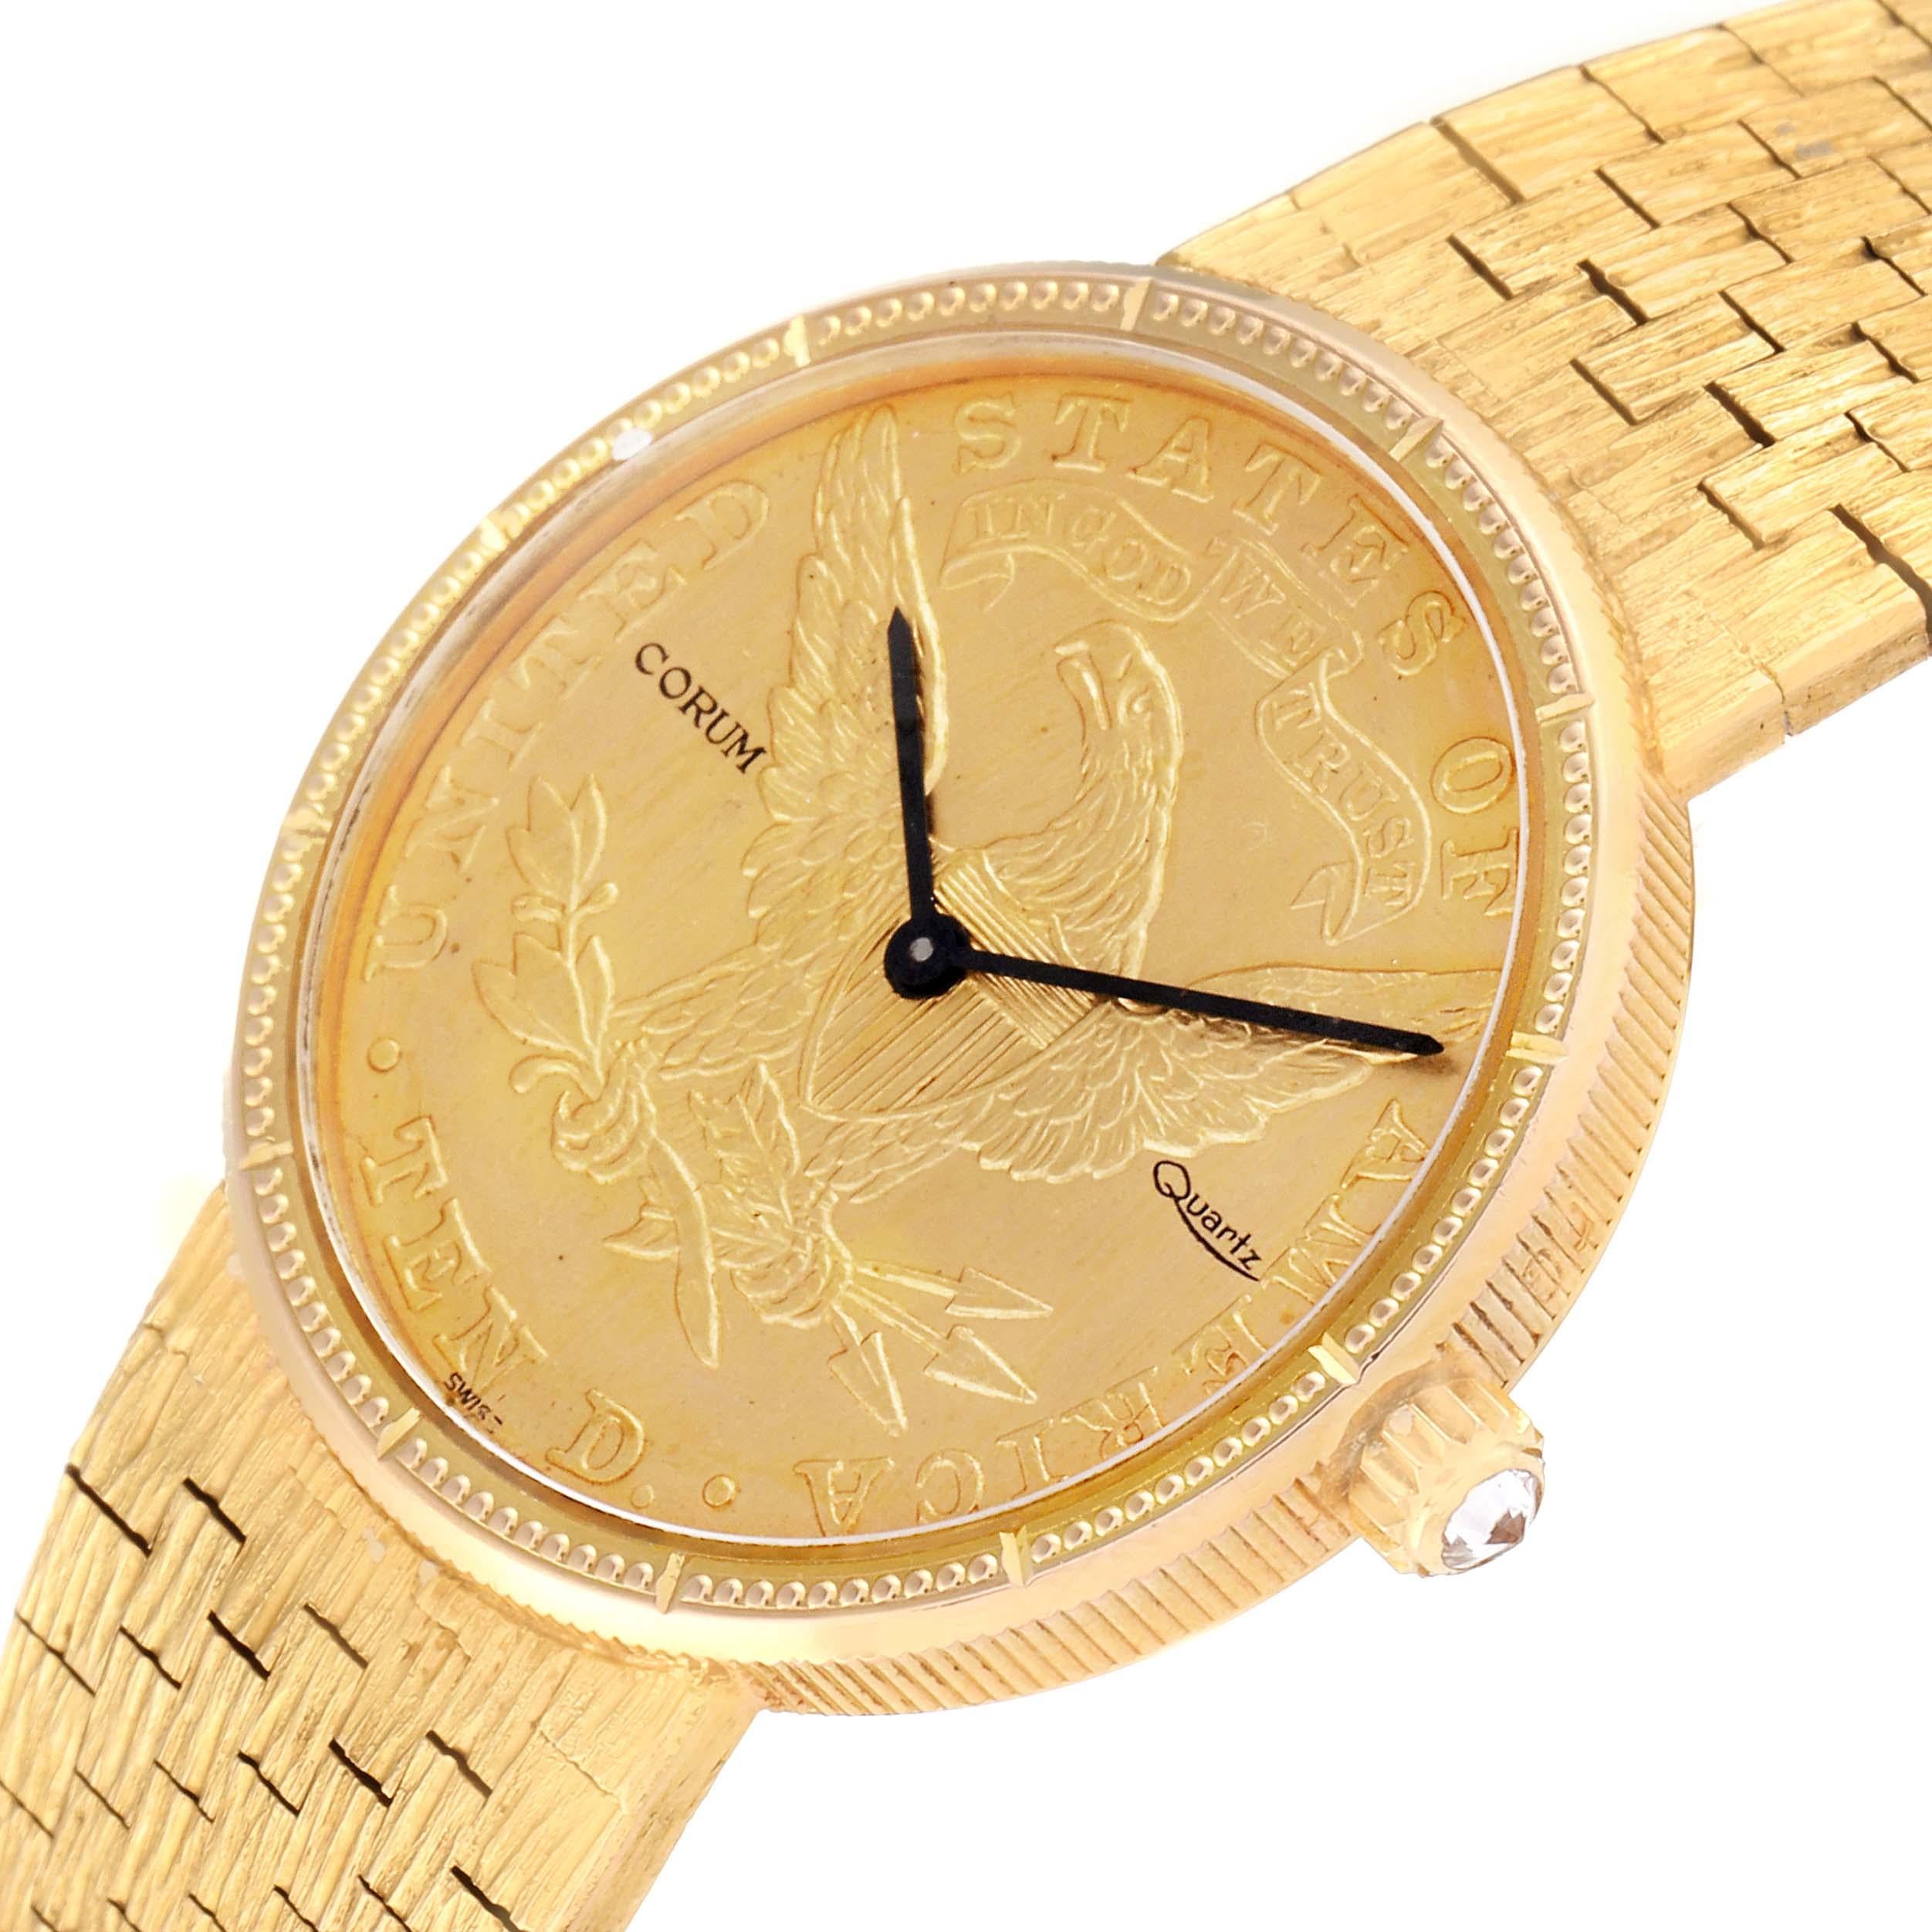 Corum Coin 10 Dollars Double Eagle Yellow Gold Ladies Watch 1901 In Excellent Condition For Sale In Atlanta, GA